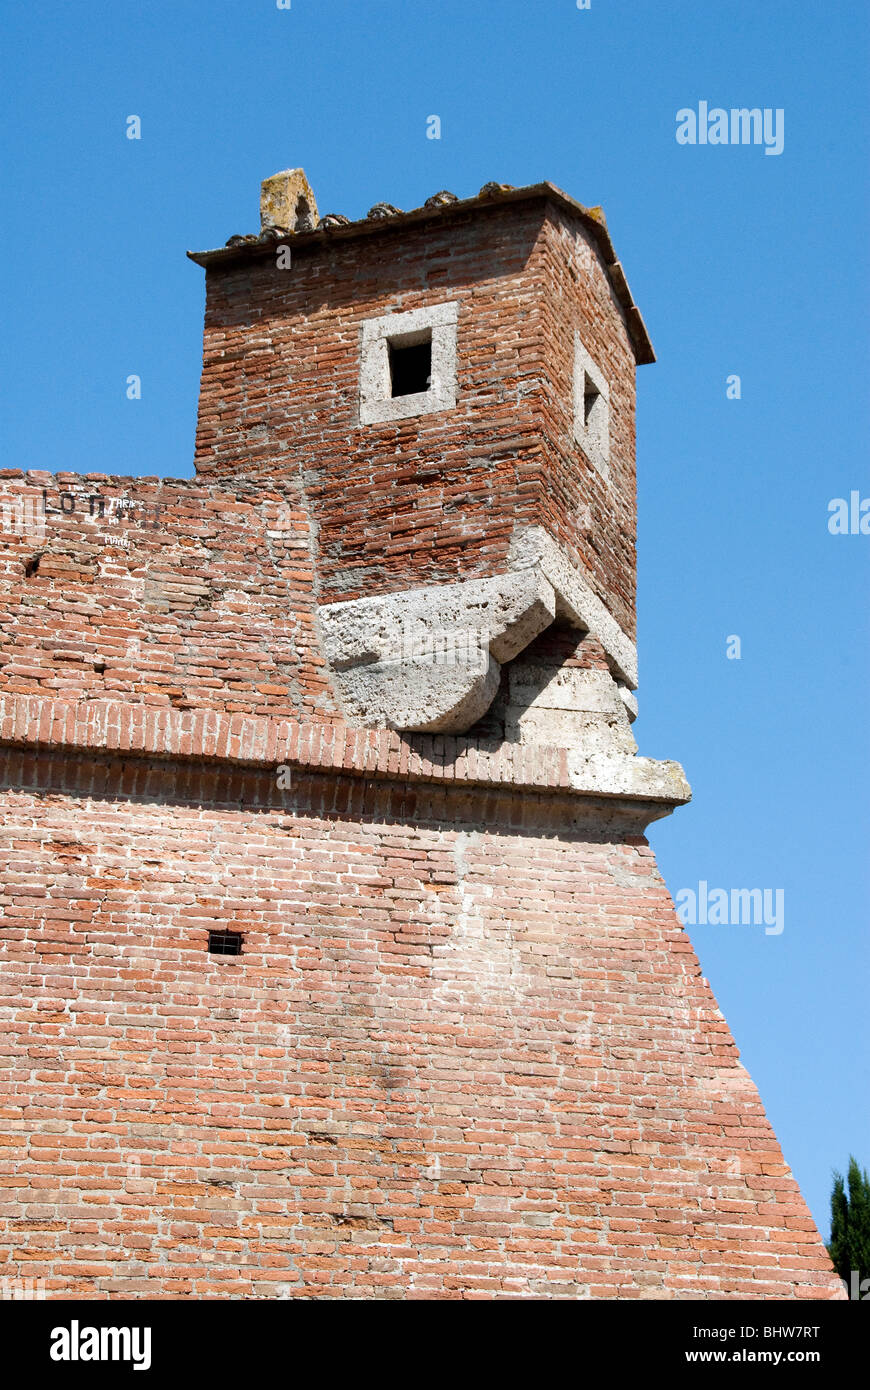 Walls of the Medici Fortress in the town of Grosseto, Italy Stock Photo